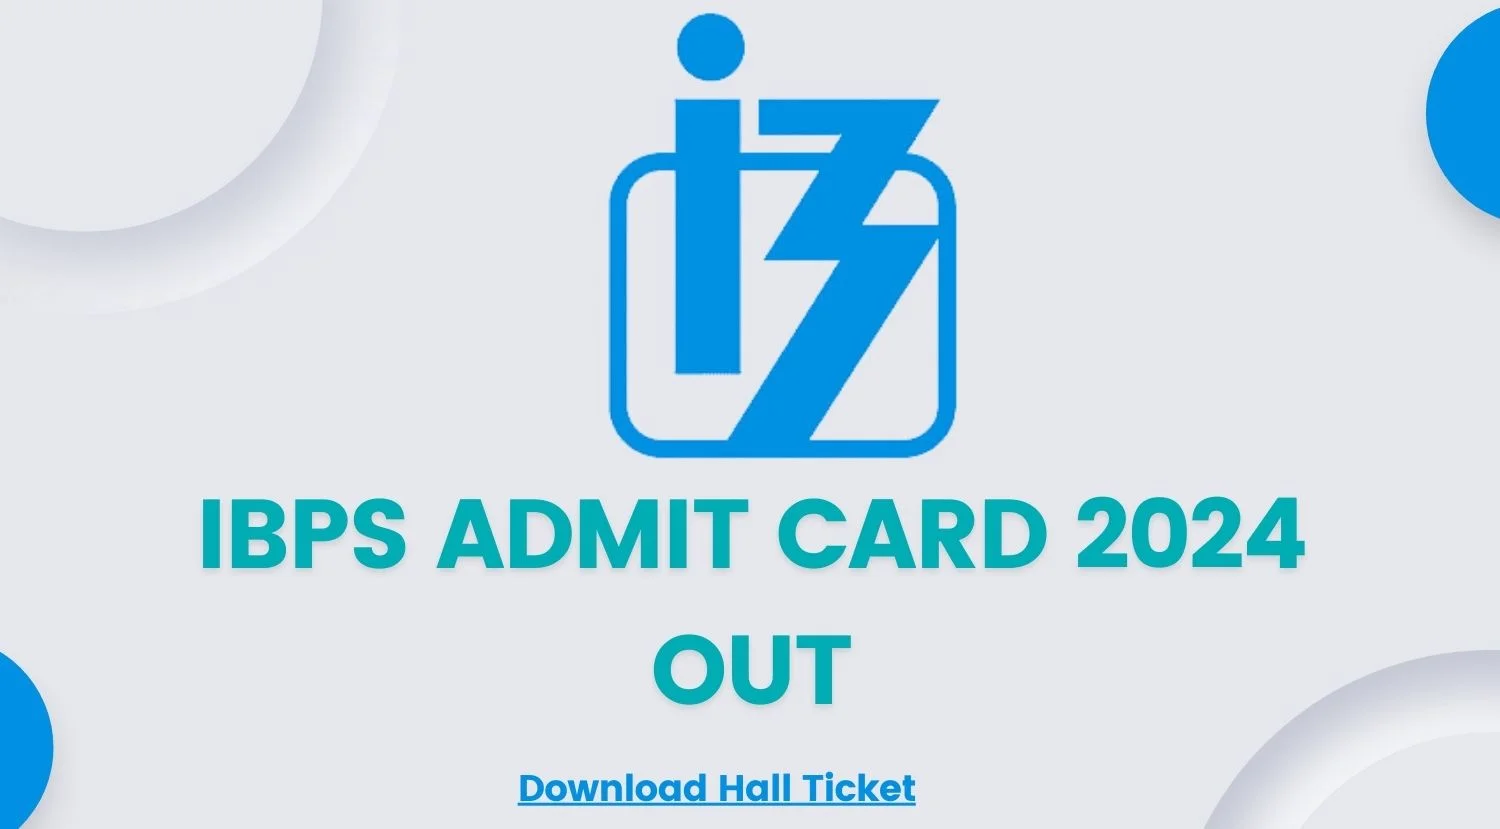 IBPS Admit Card 2024 OUT